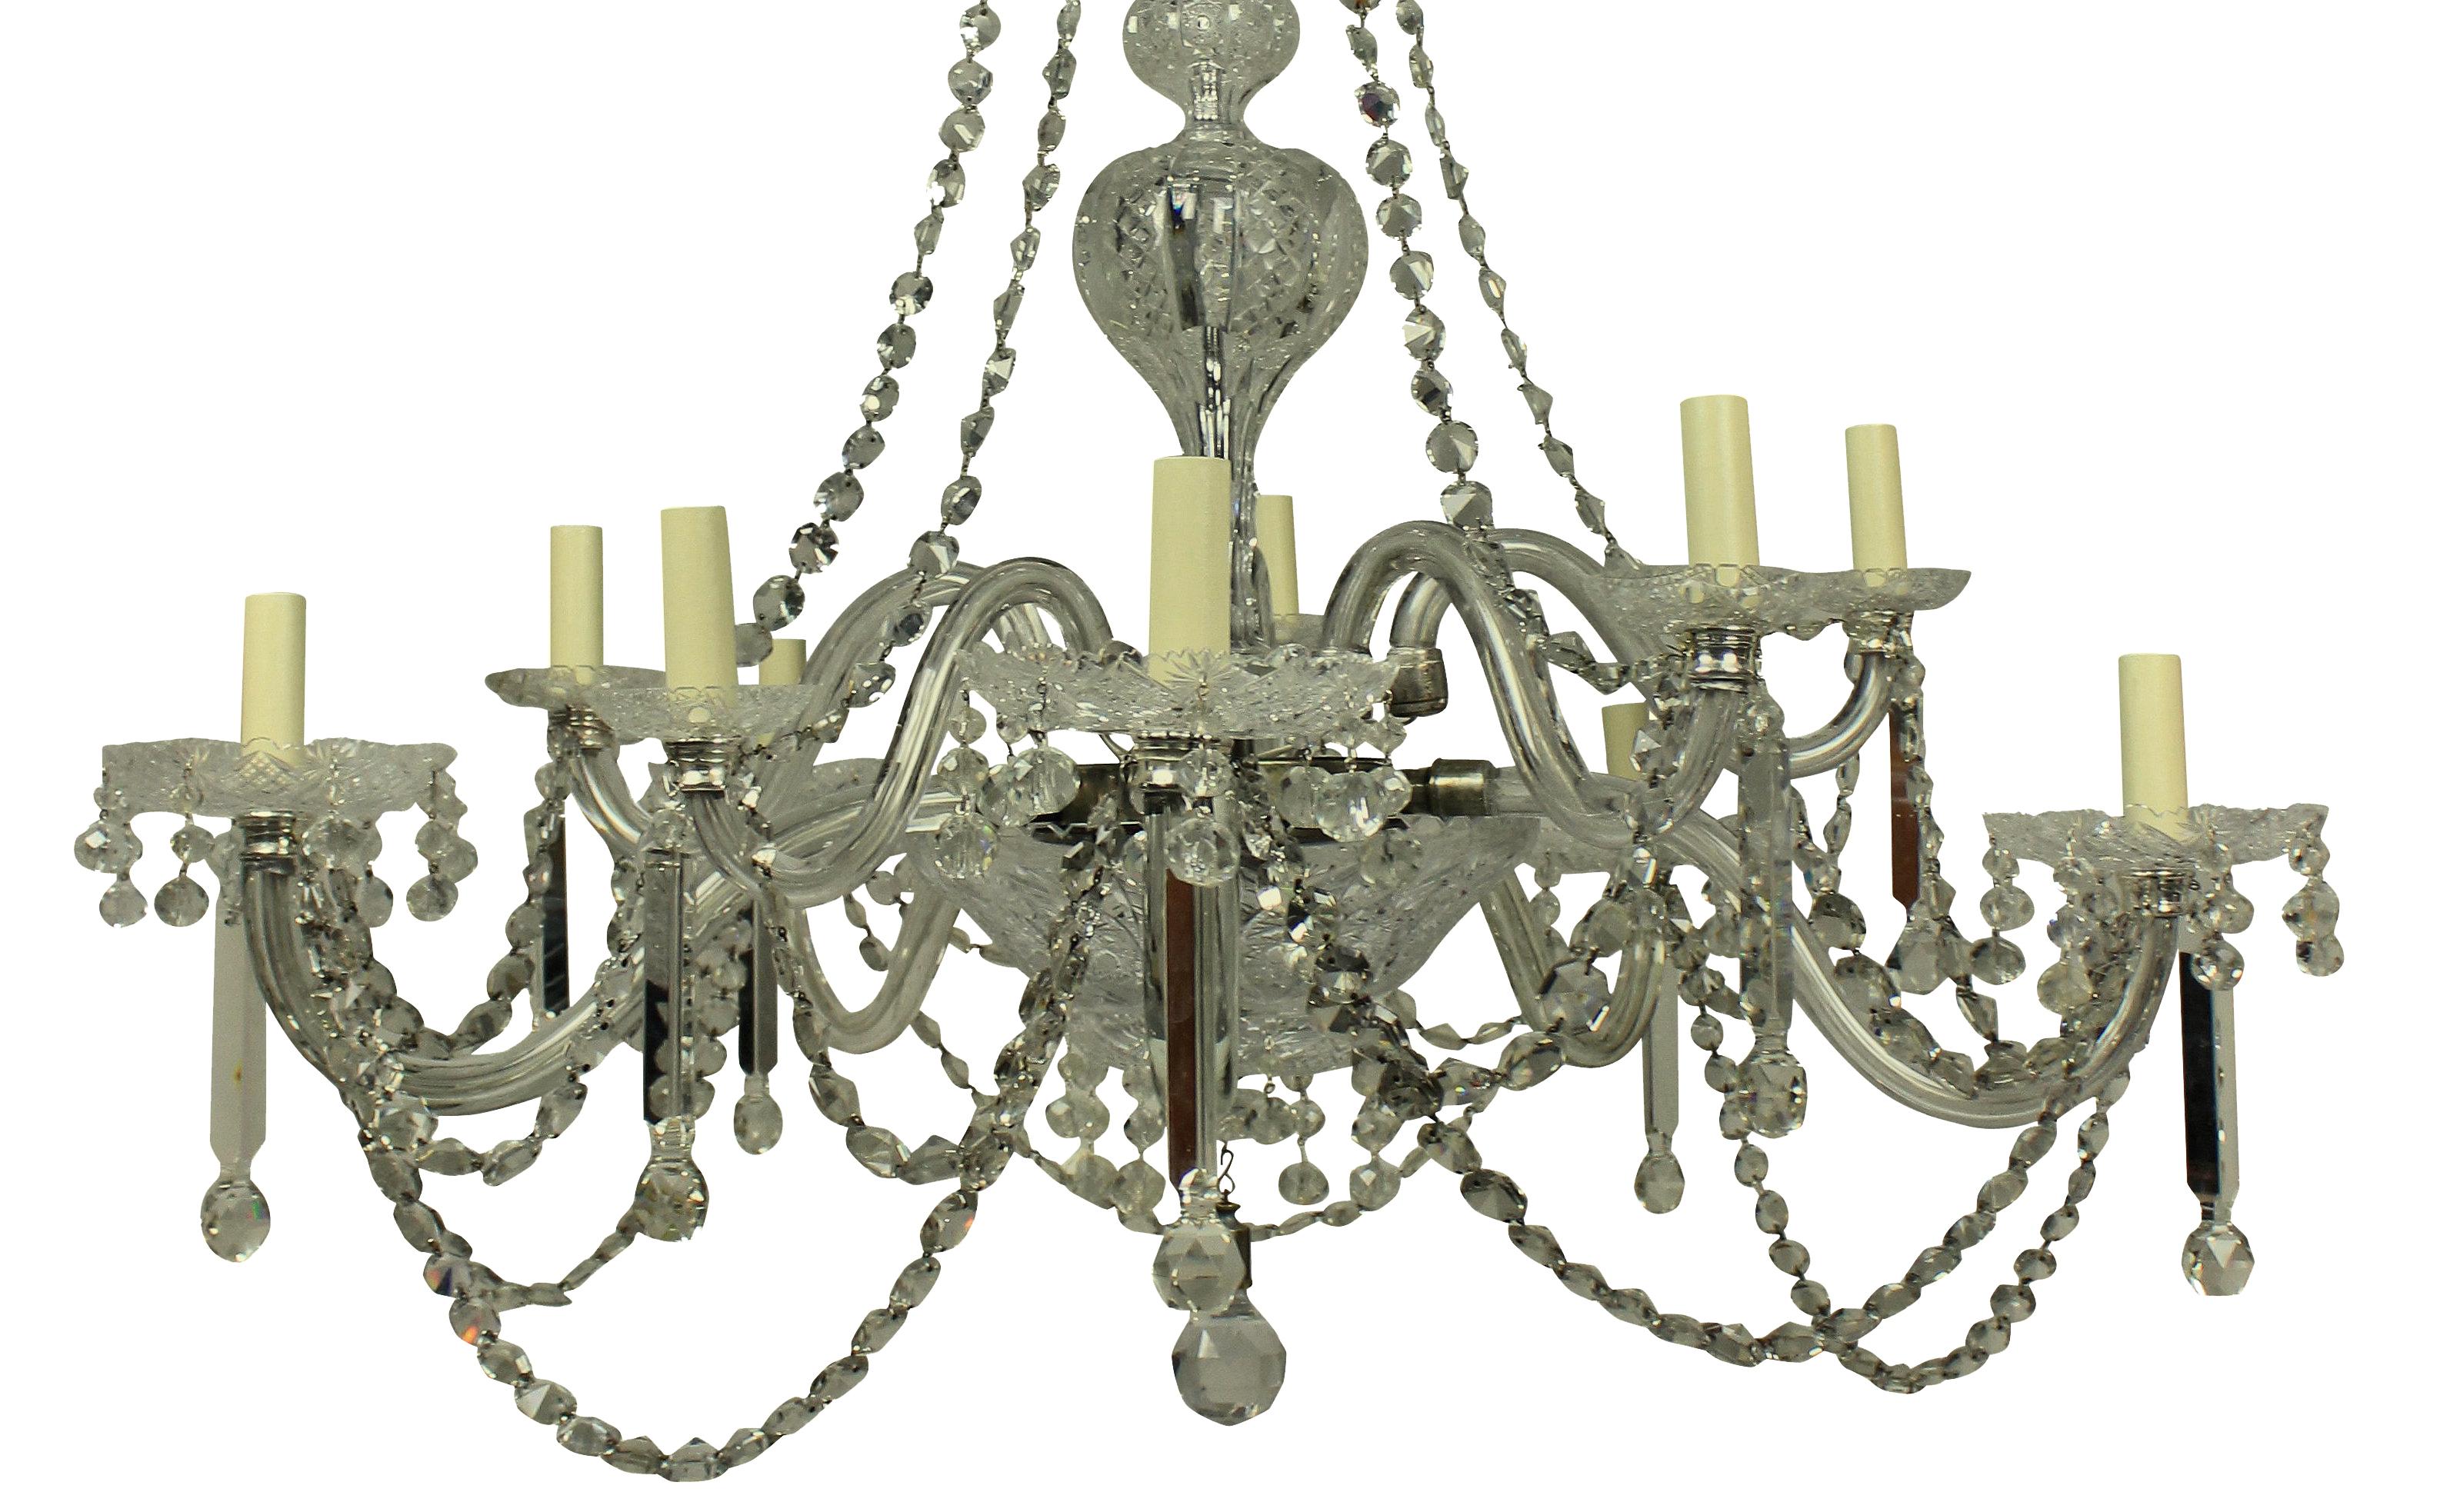 Late 19th Century Large 19th Century English Cut-Glass Chandelier of Good Quality